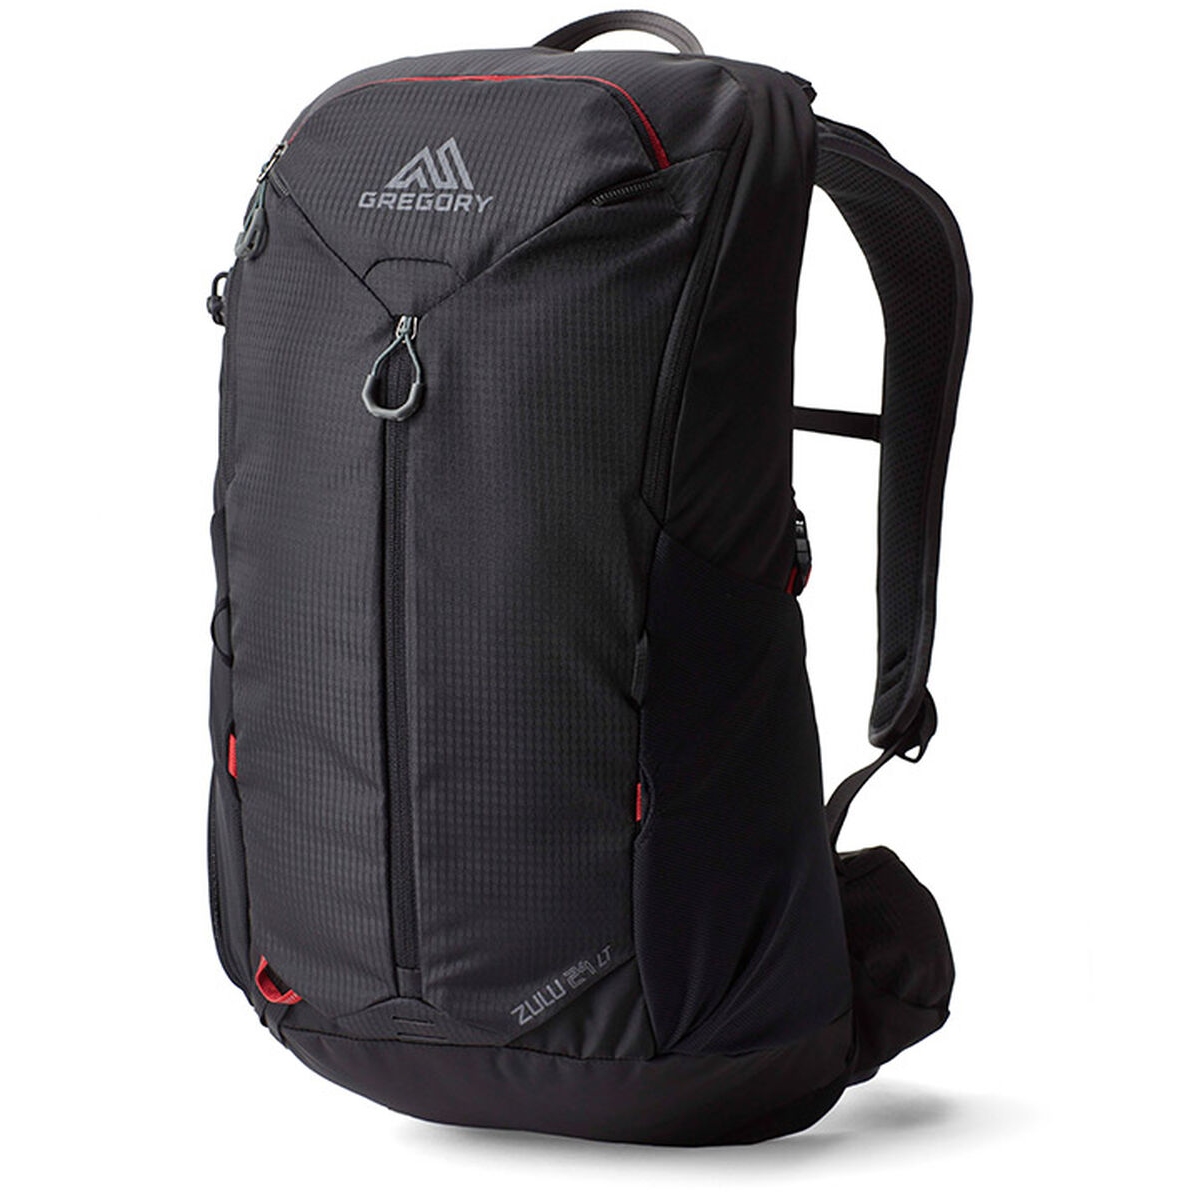 Picture of Gregory Zulu 24 LT Backpack - Volcanic Black